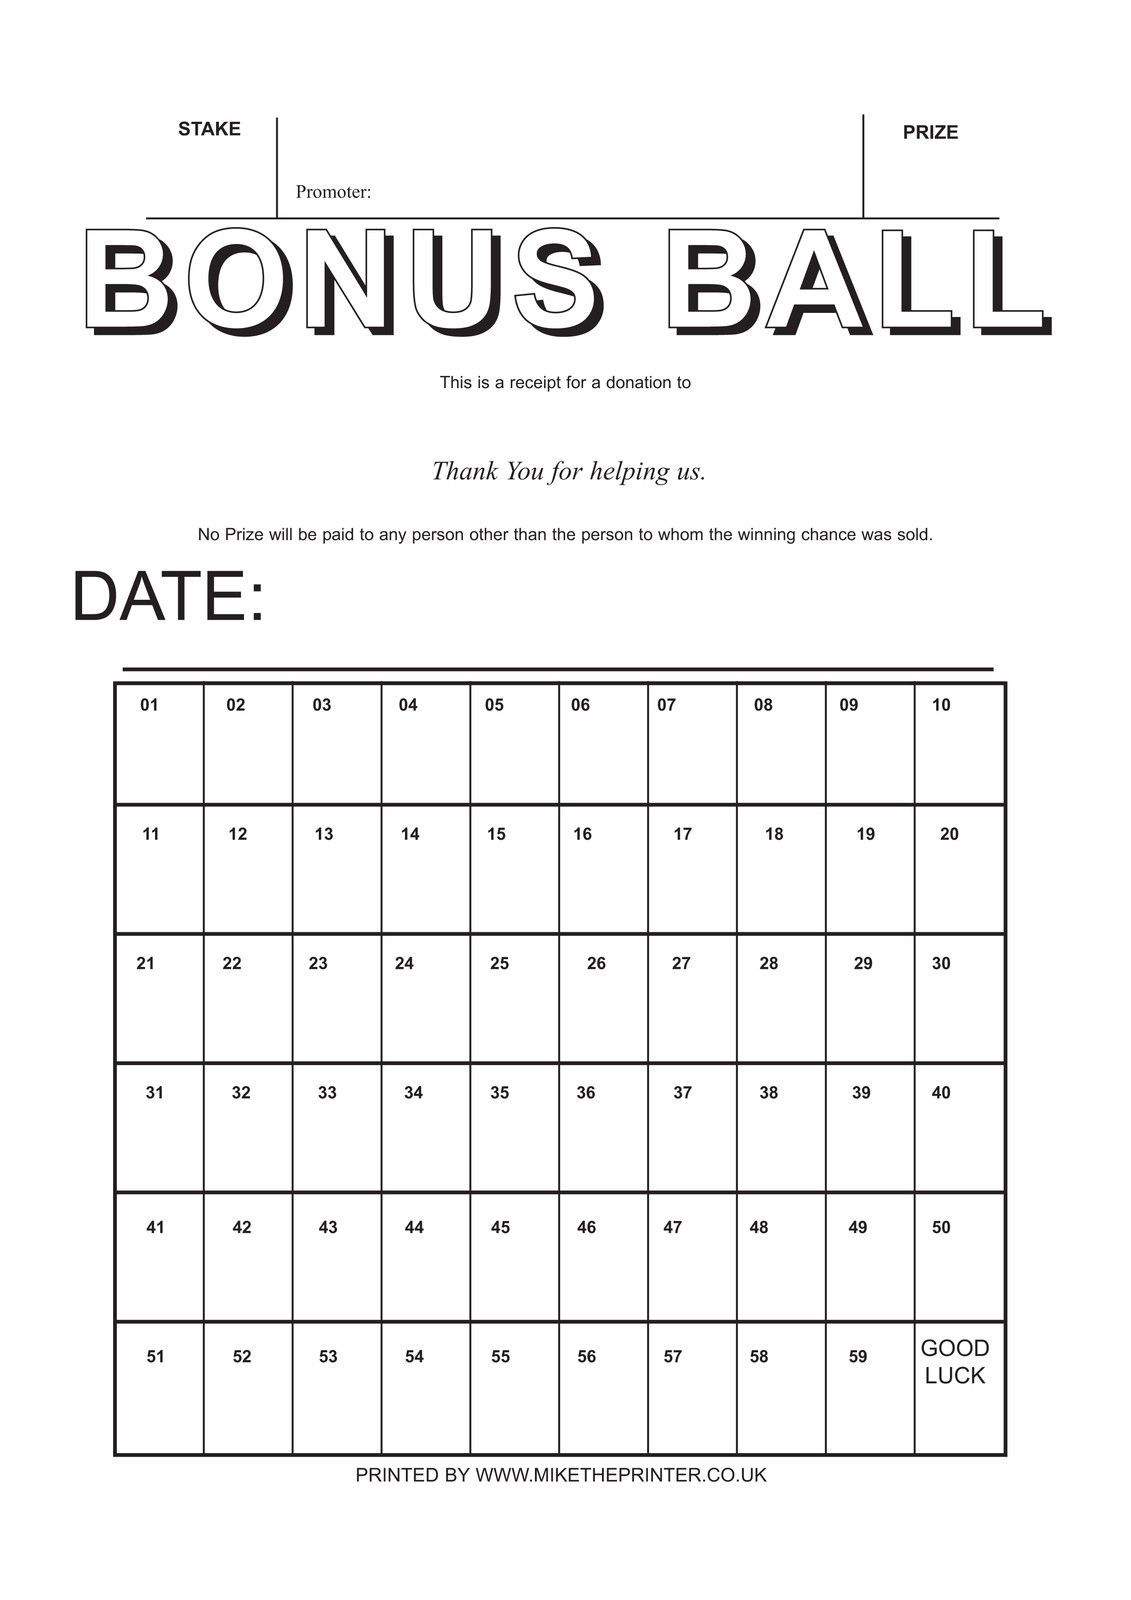 Details About 5 Bonus Ball Cards - Lotto - A4 Printed On Card - 59 - Administrative Professionals Cards Printable Free